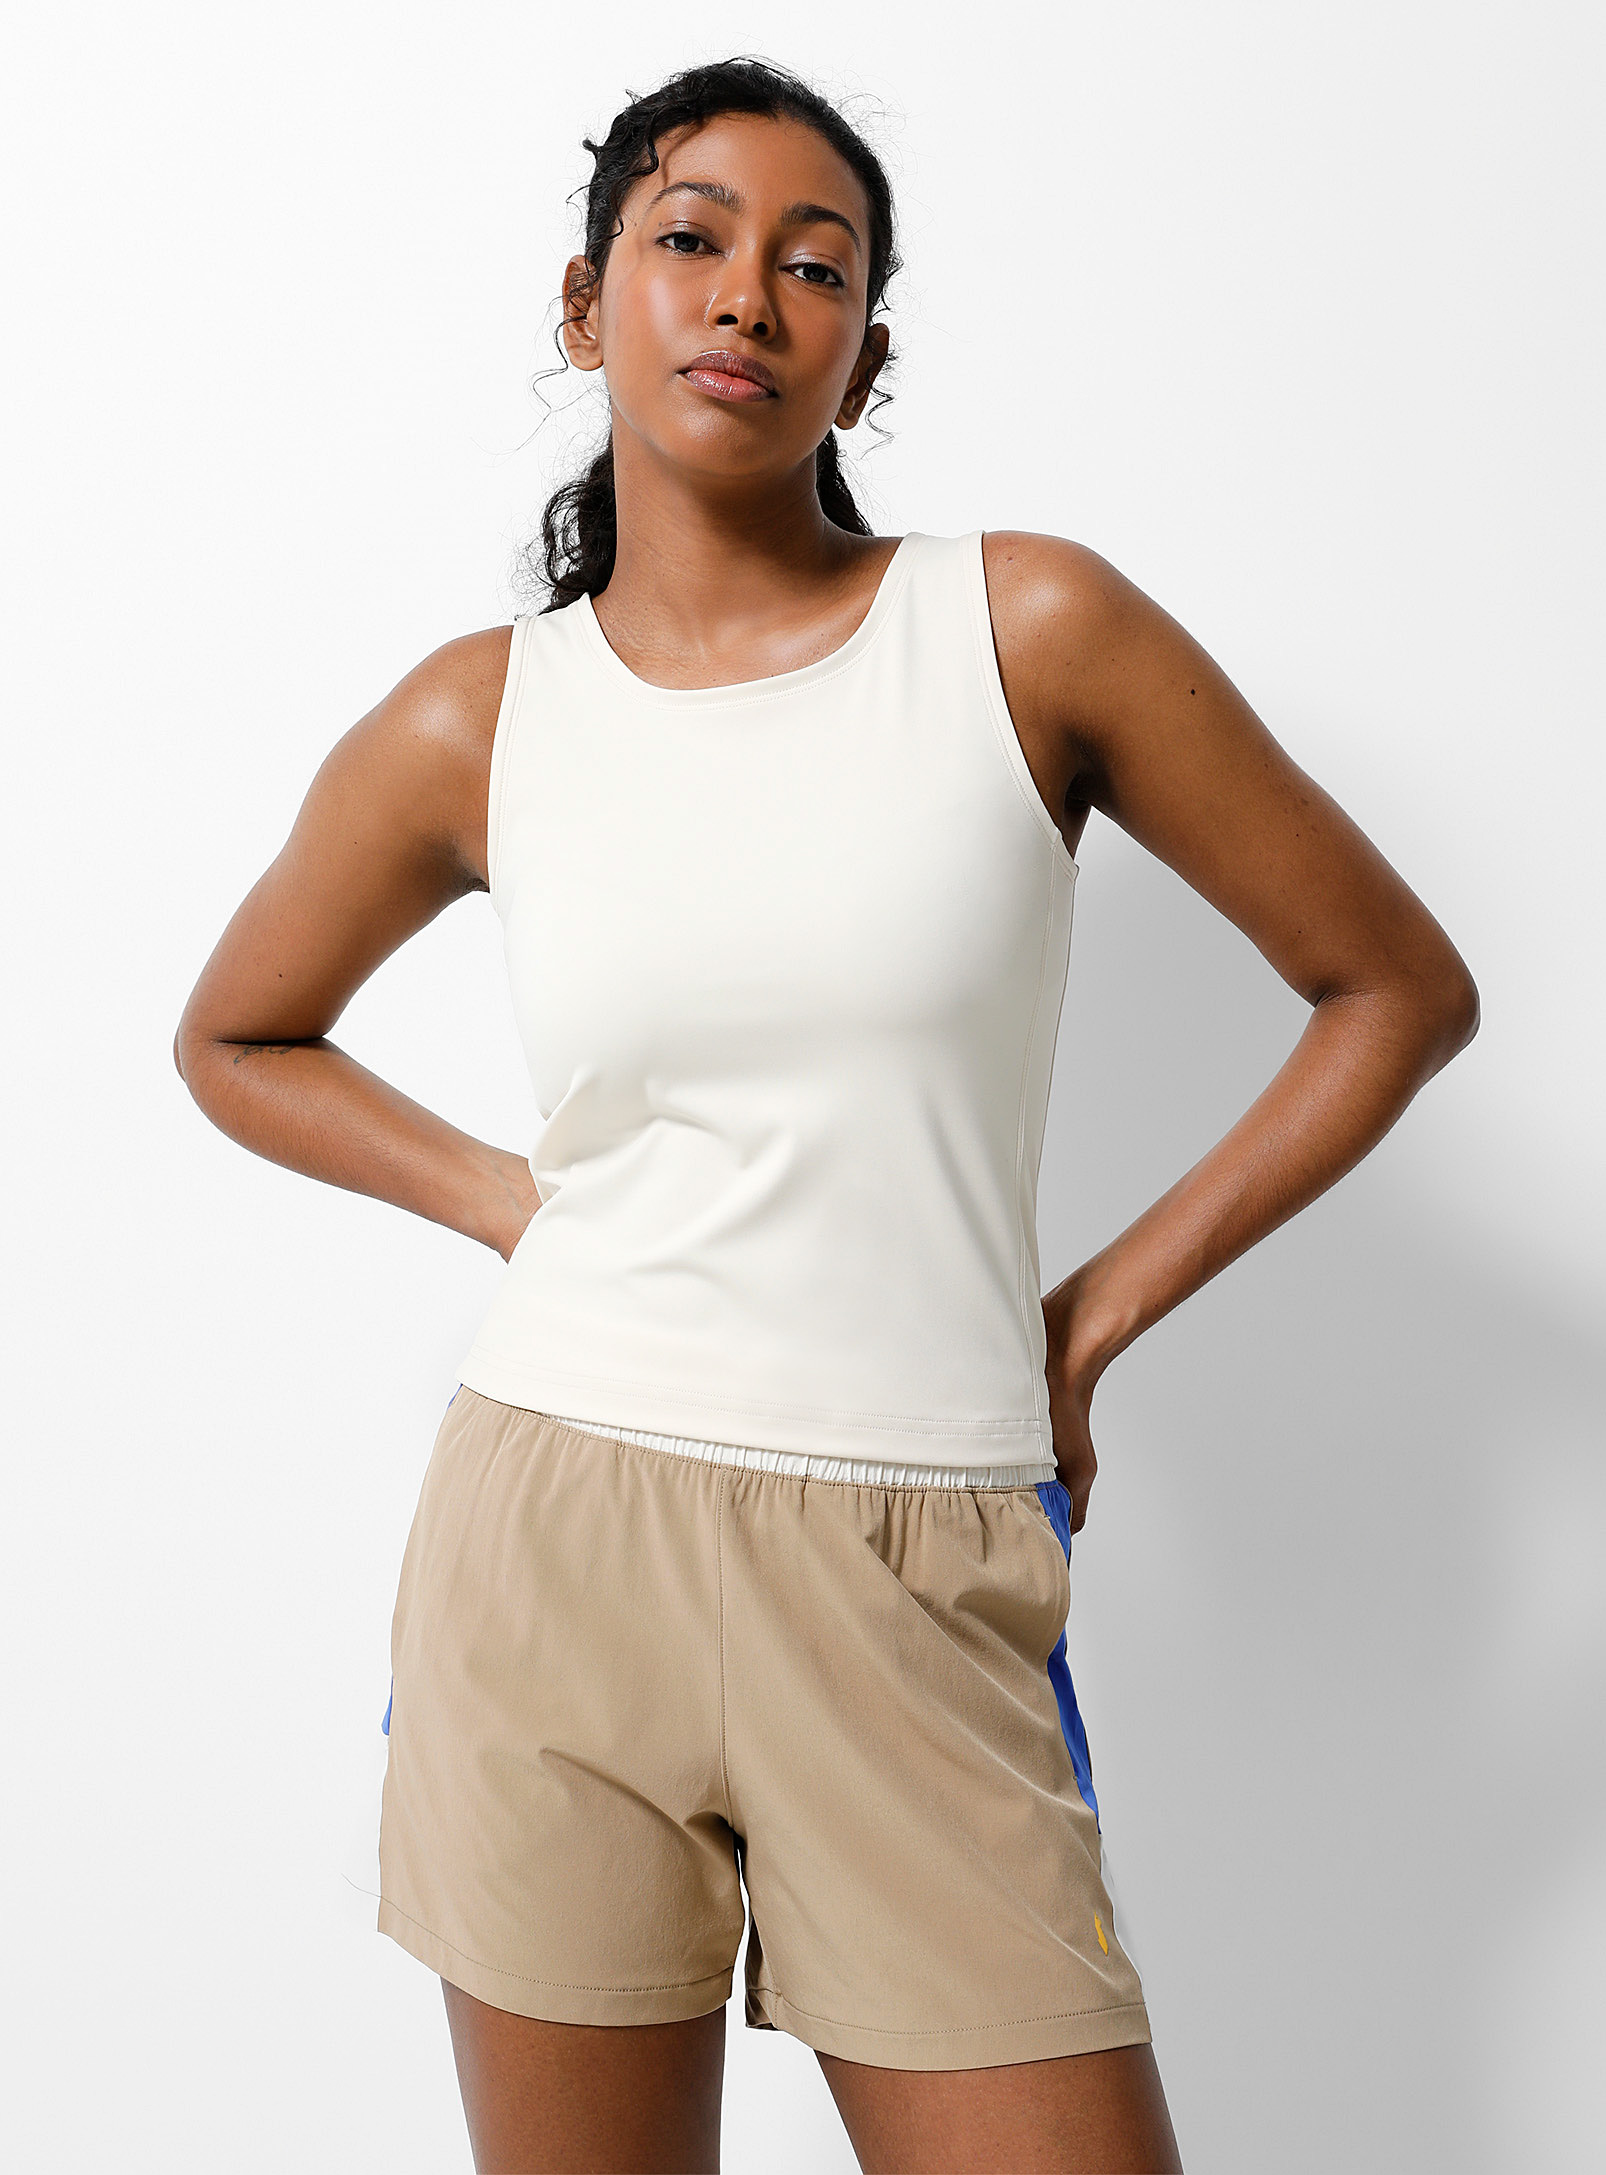 Cotopaxi - Women's Muevo fitted tank